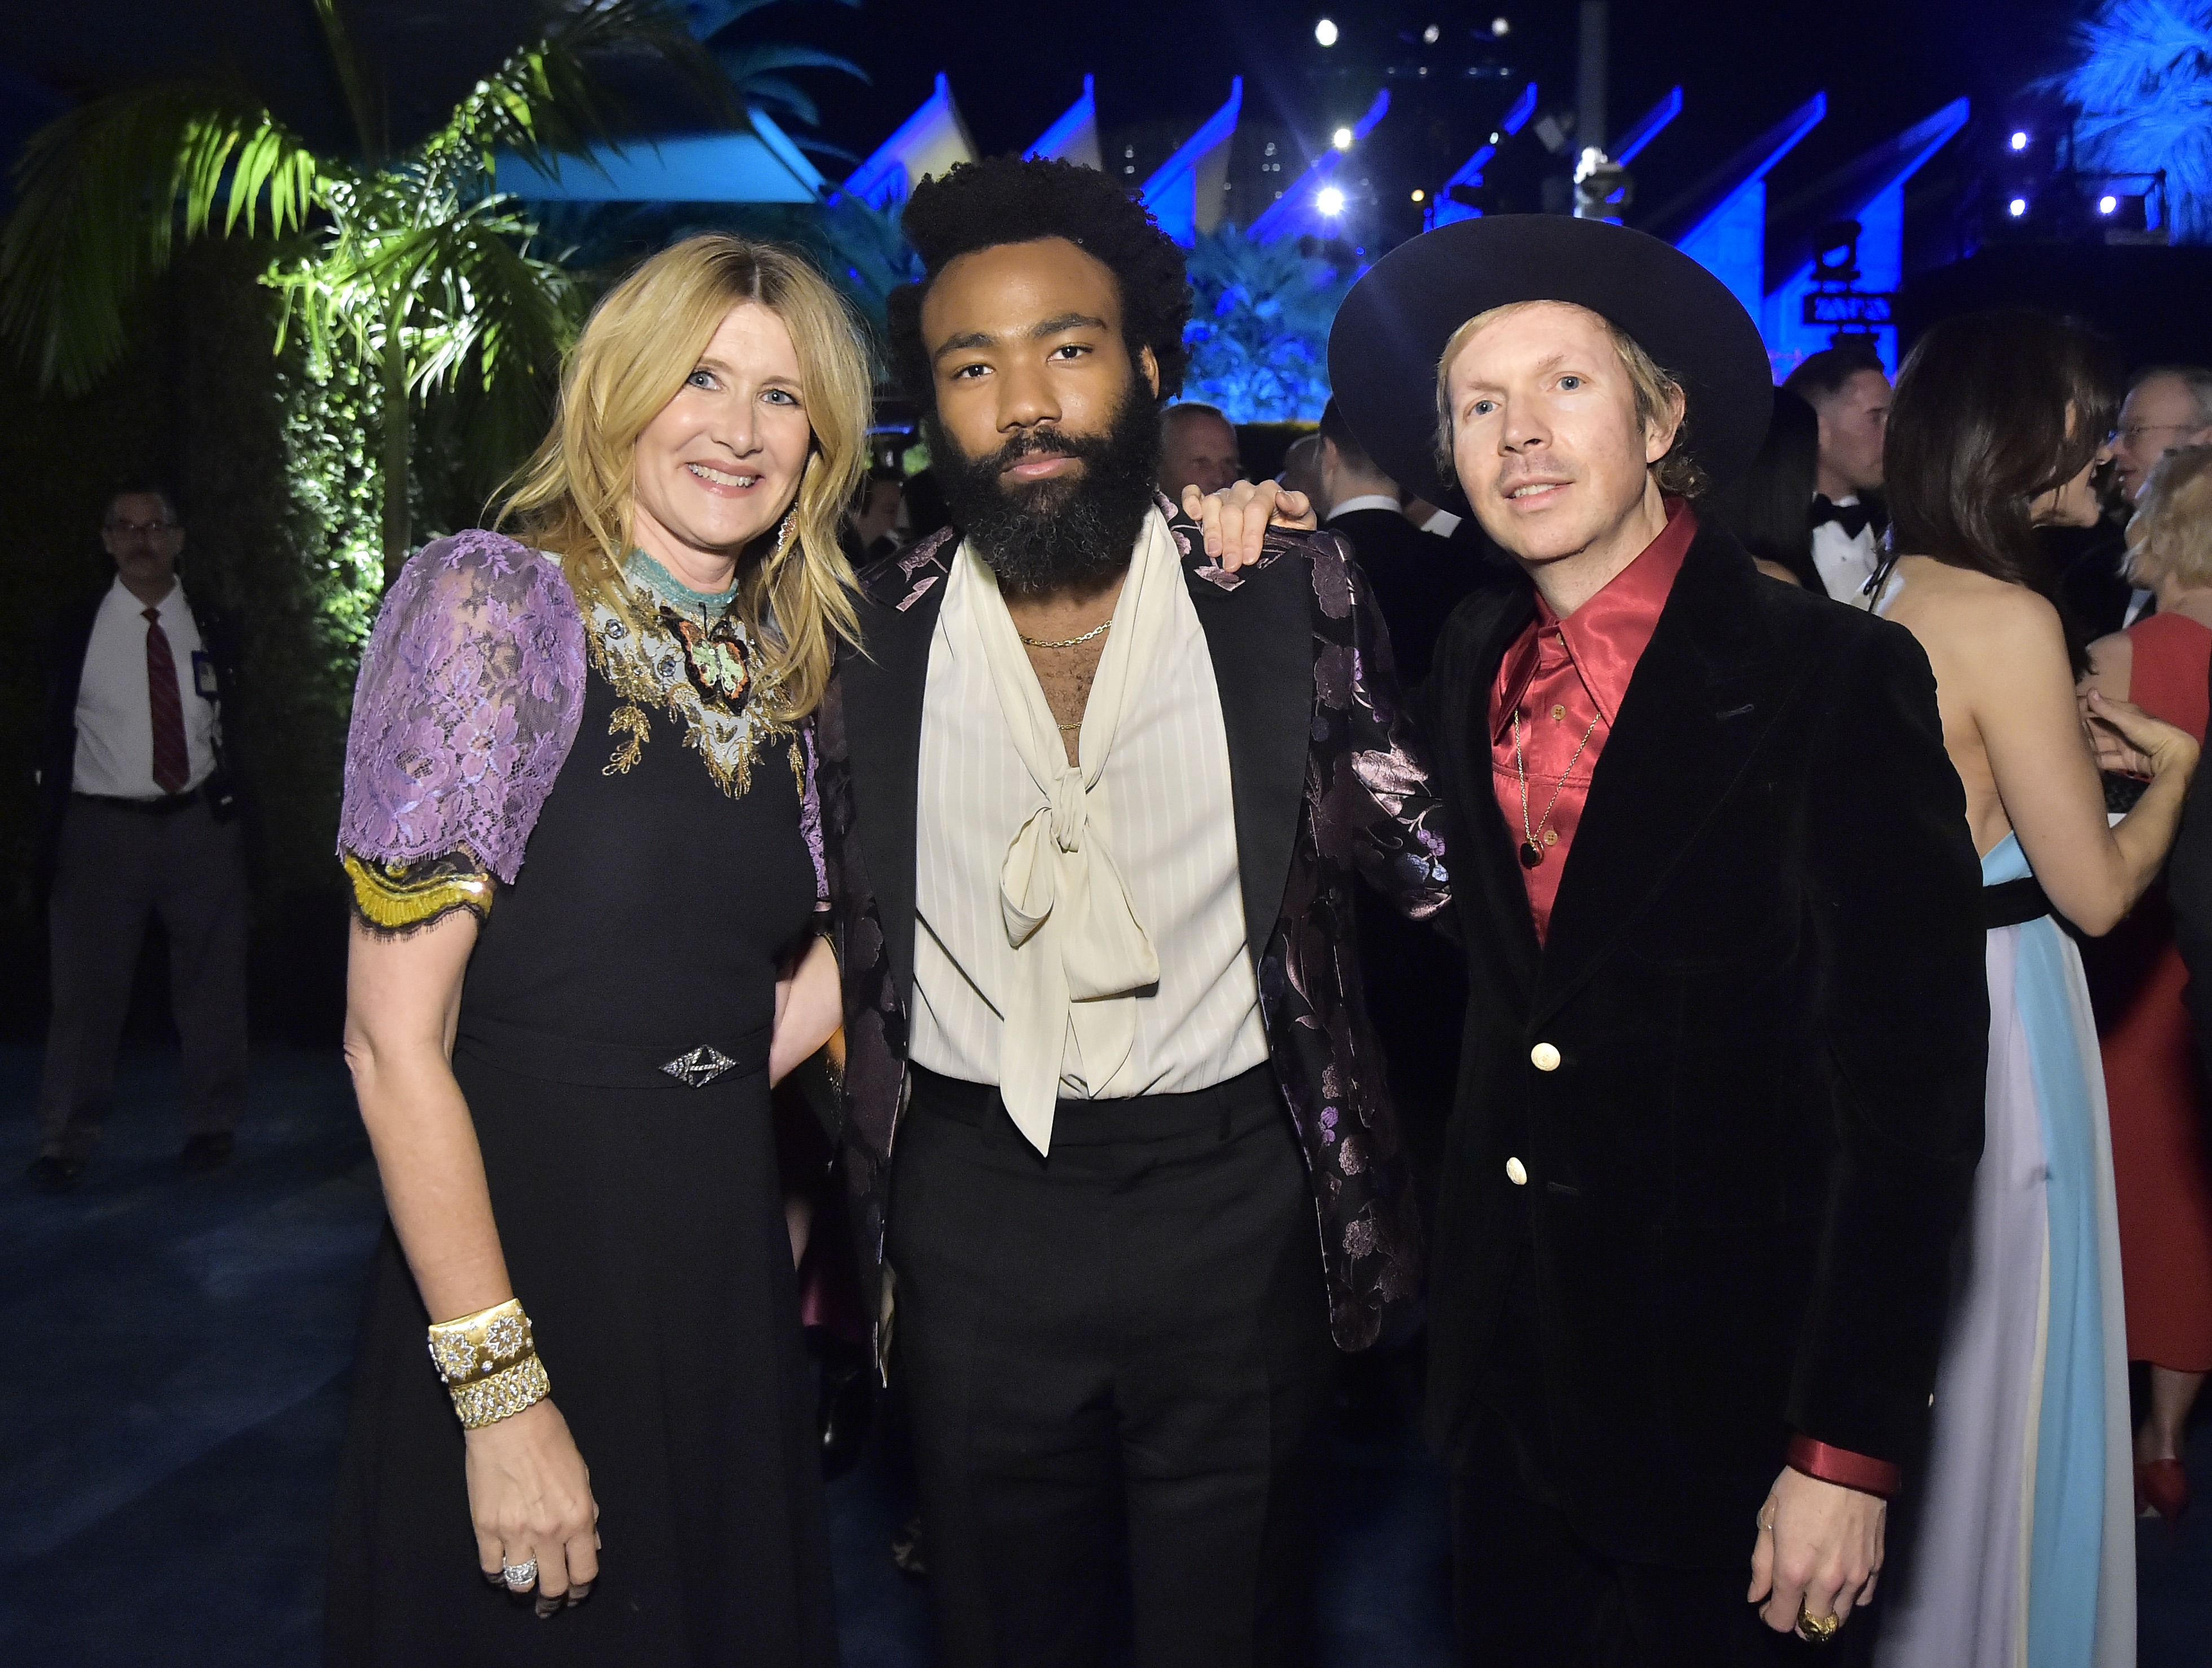 Laura Dern, Donald Glover, and Beck, photo by Stefanie Keenan/Getty Images for LACMA